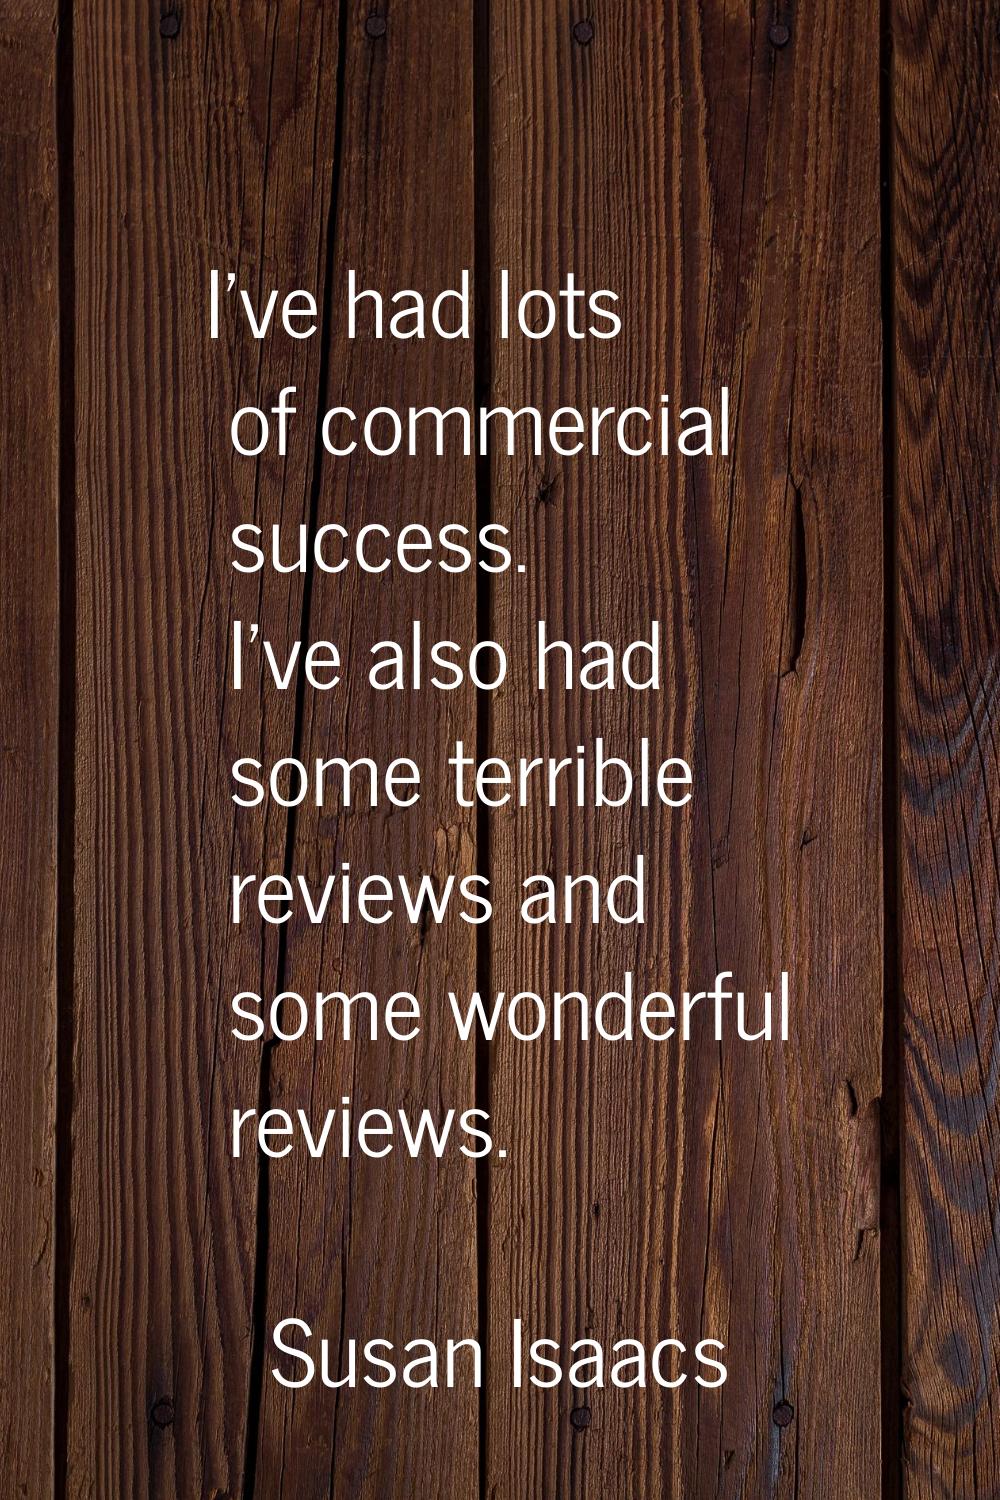 I've had lots of commercial success. I've also had some terrible reviews and some wonderful reviews